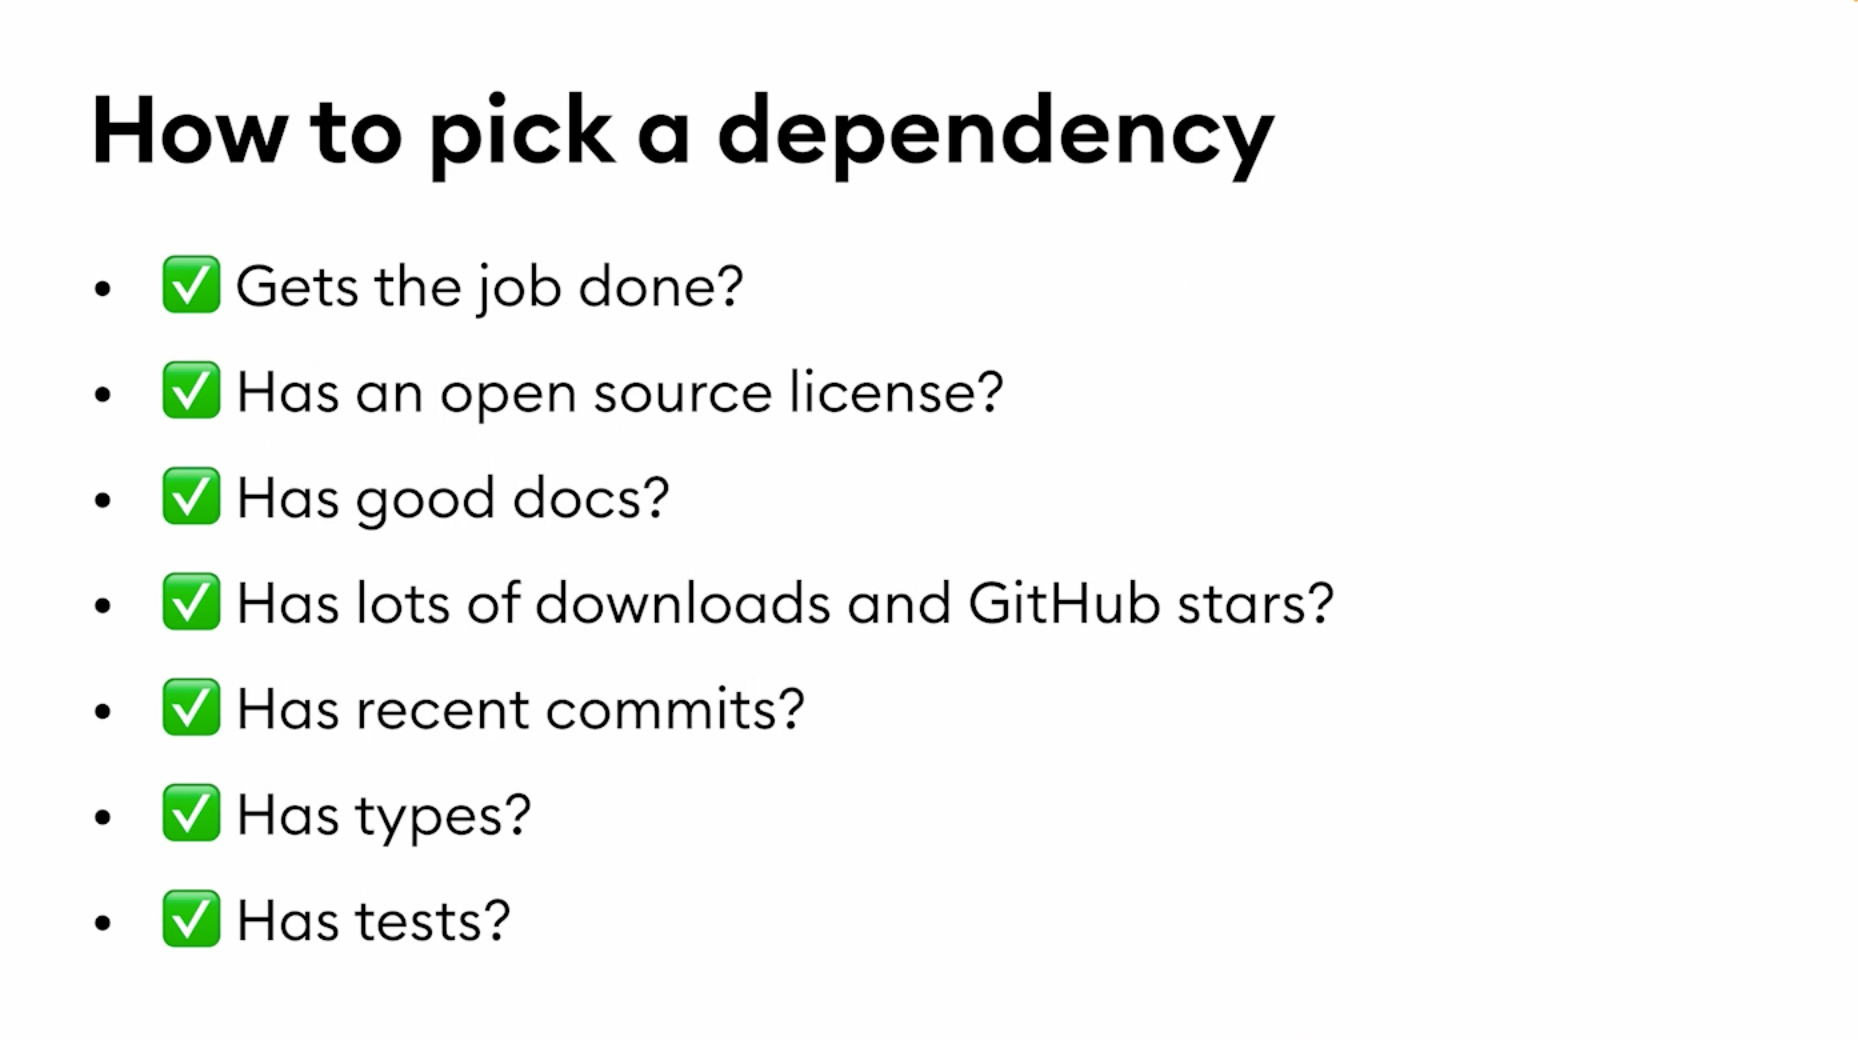 Questions that lead to the decision of "How to pick a dependency"